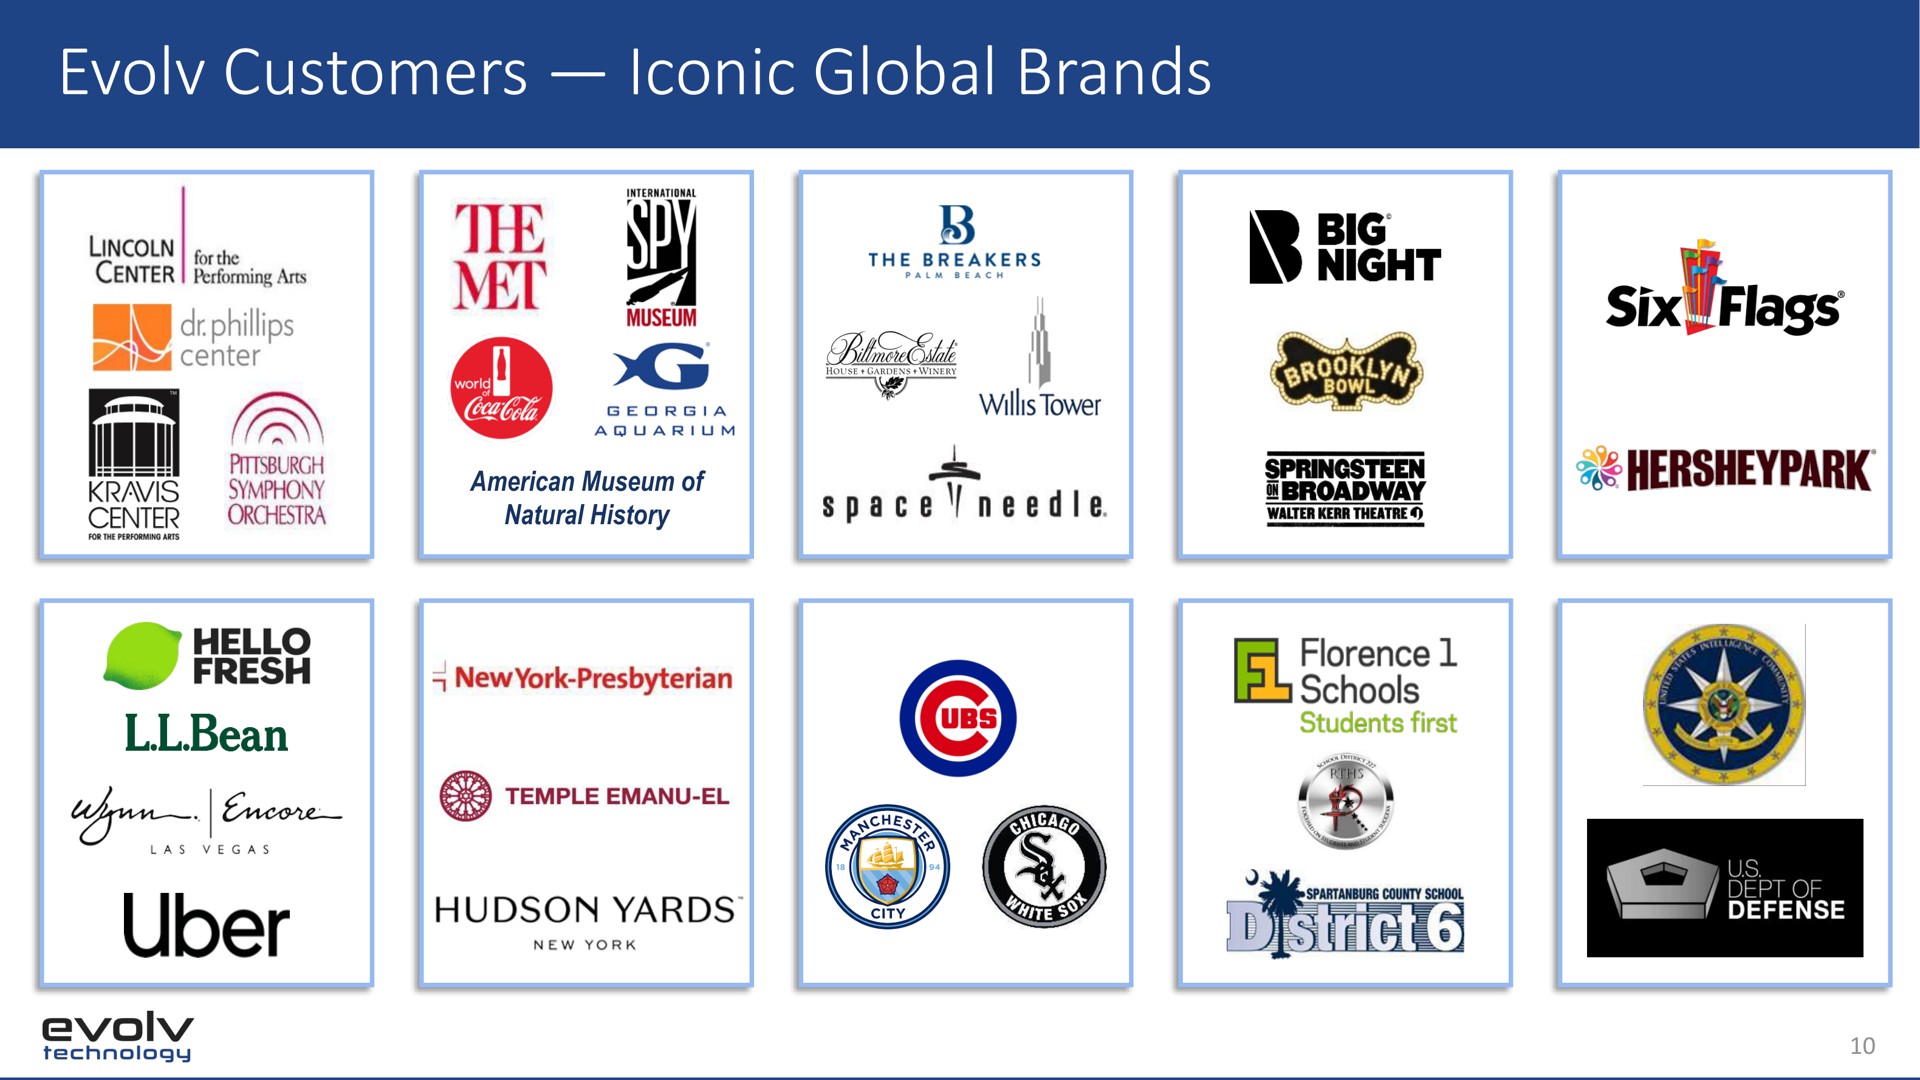 customers iconic global brands the breakers rist six big night red | Evolv